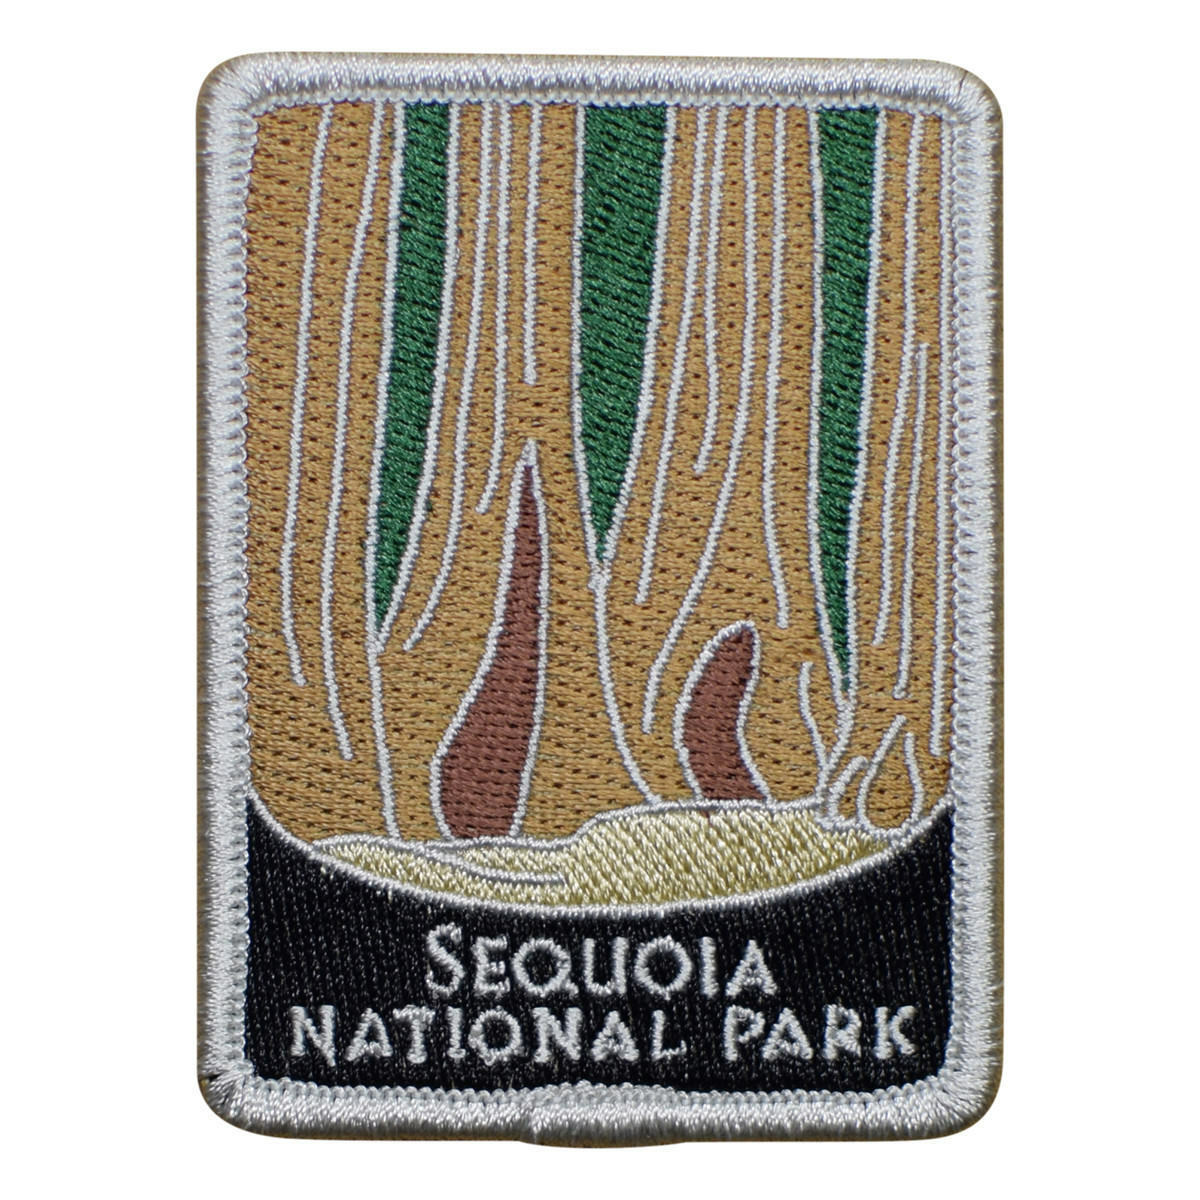 Sequoia National Park Patch - Redwood Trees, California Badge 3 (Iron on)